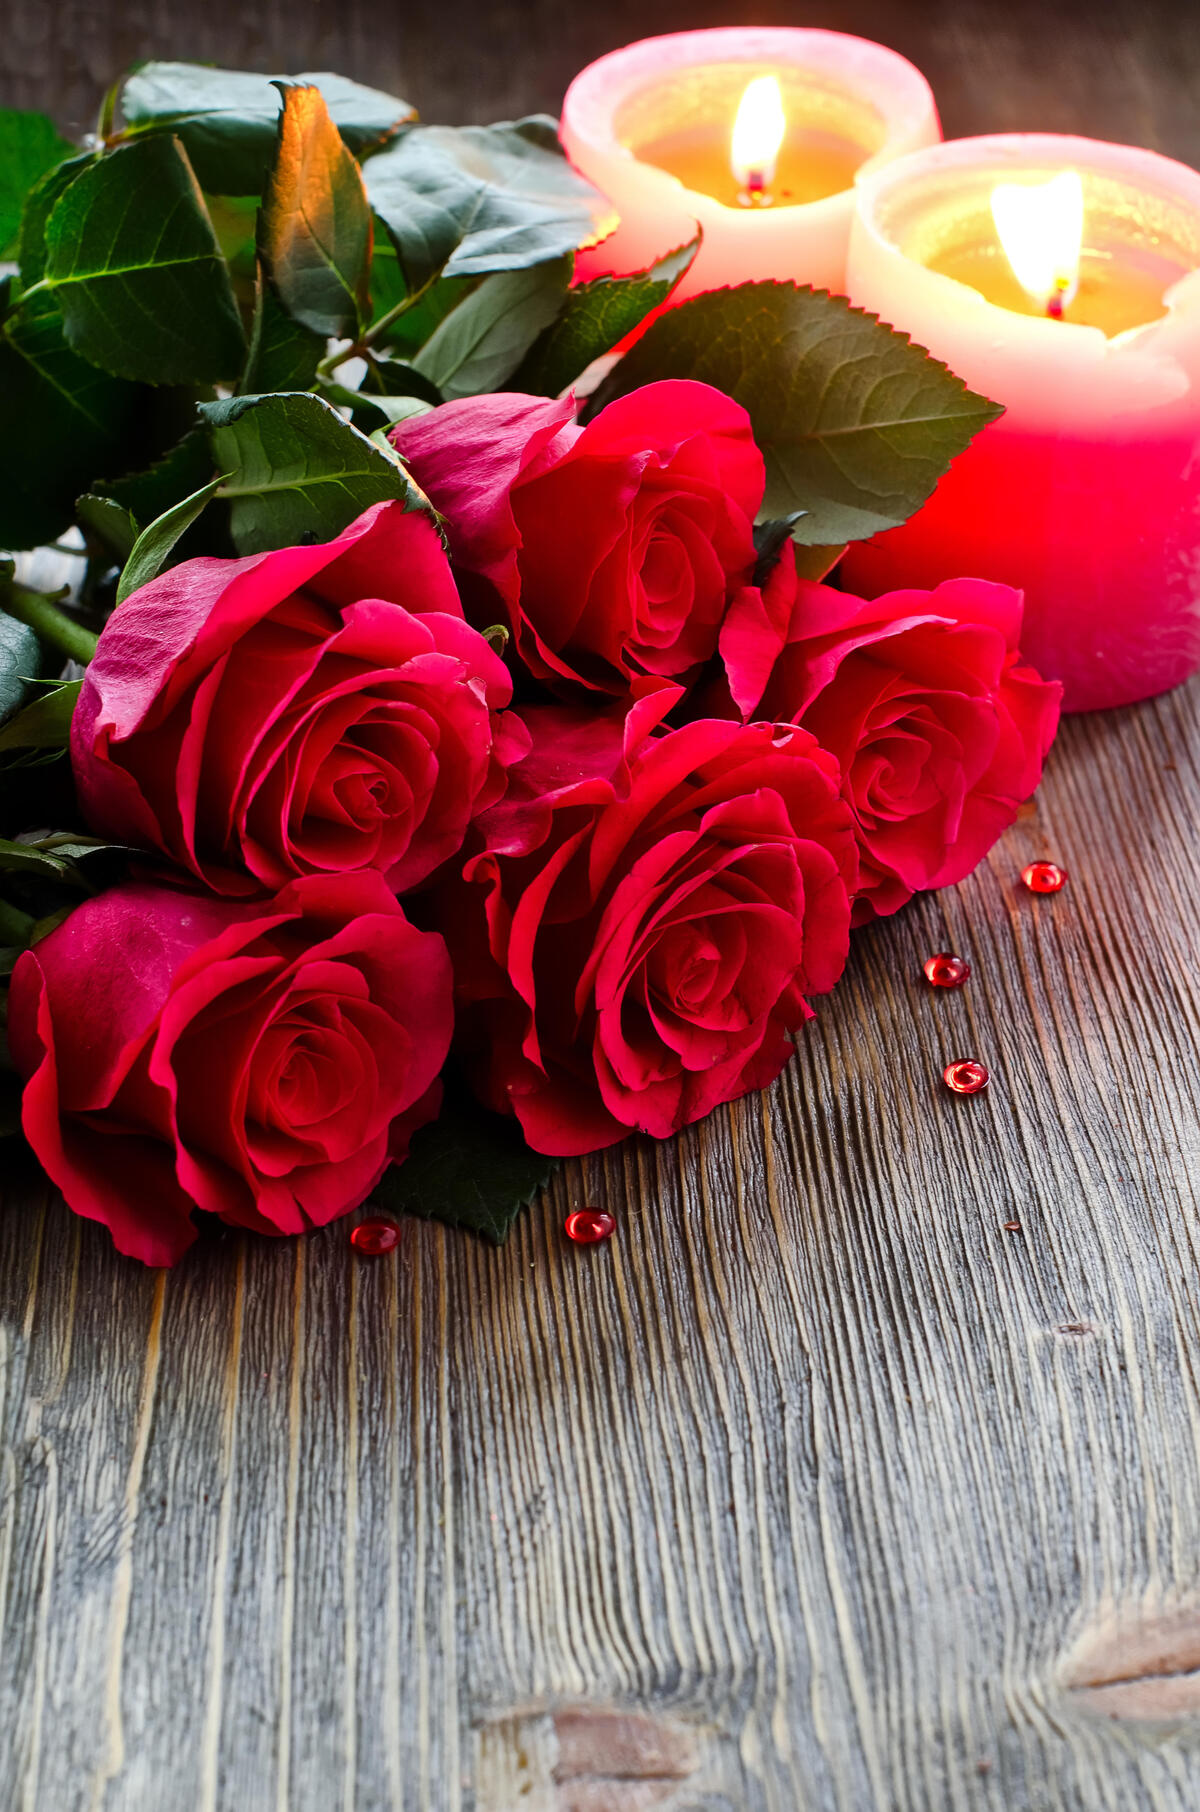 A bouquet of red roses next to burning candles